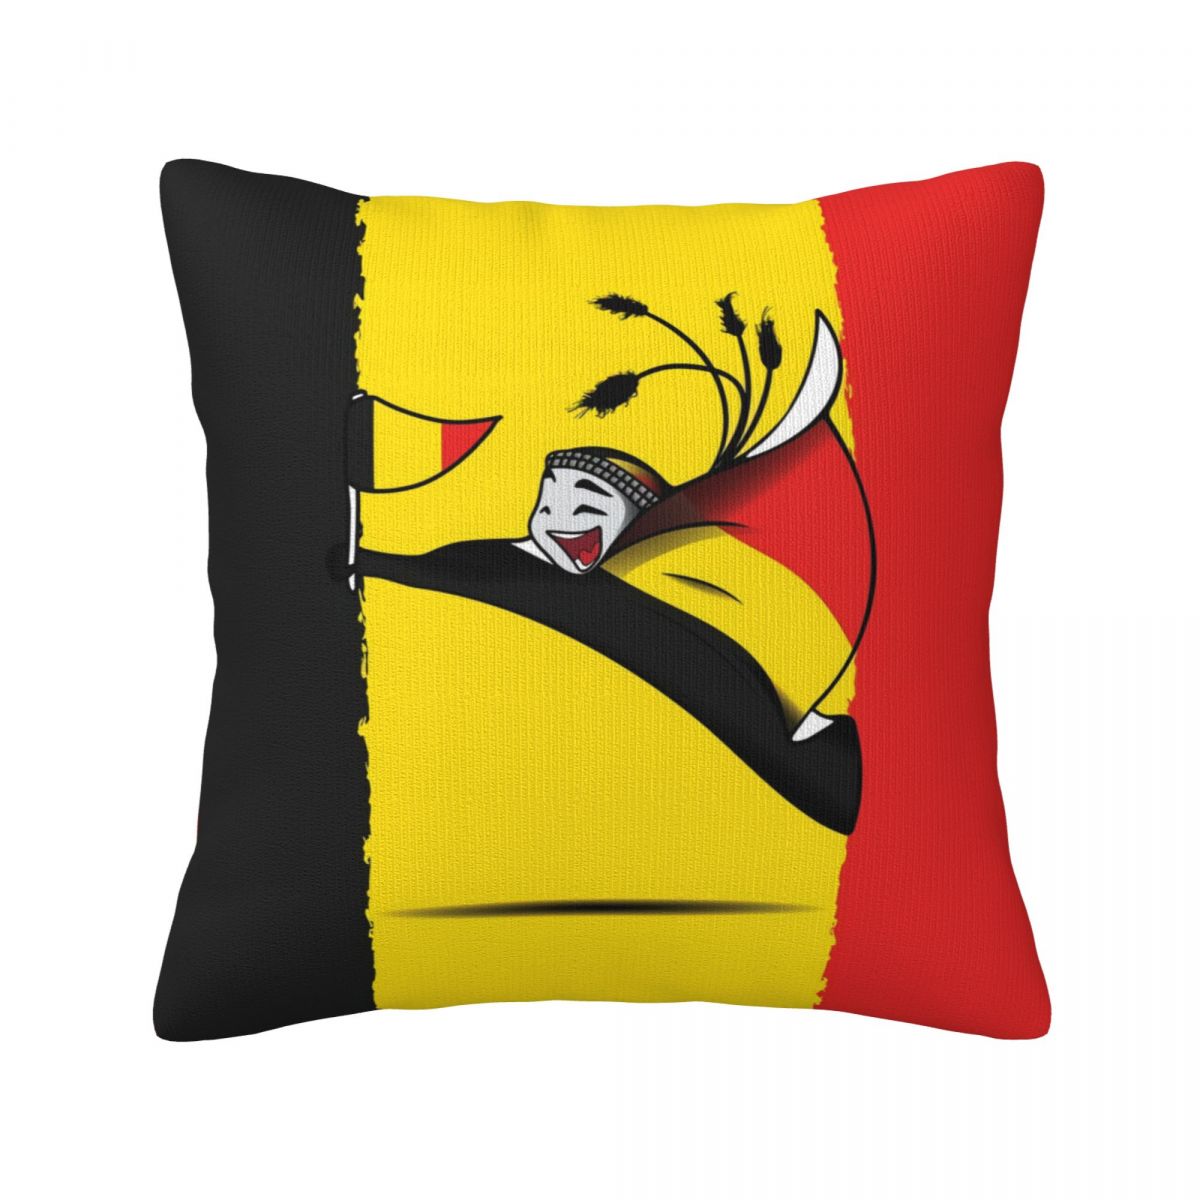 Belgium World Cup 2022 Mascot Decorative Square Throw Pillow Covers